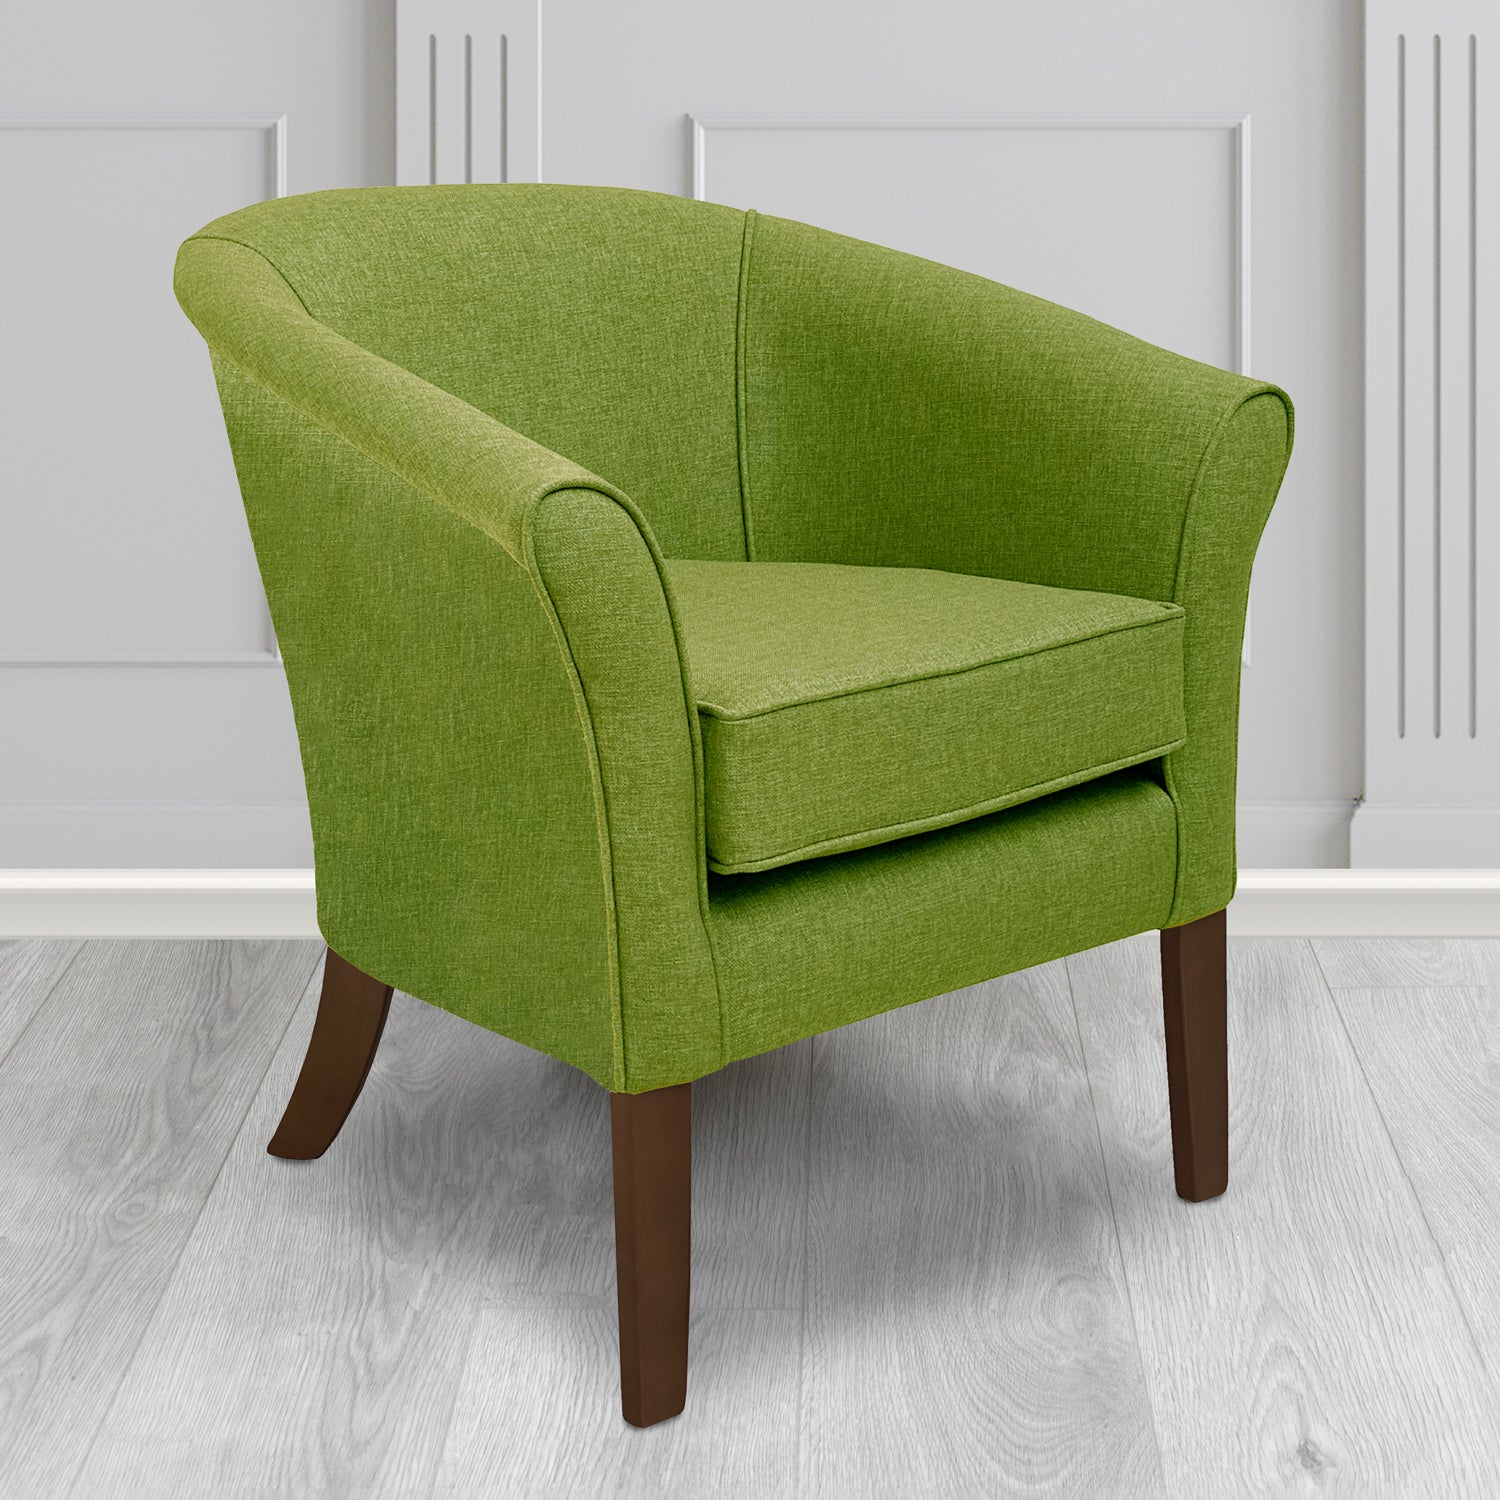 Aspen Tub Chair in Marna 243 Cactus Crib 5 Fabric - Antimicrobial, Stain Resistant & Waterproof - The Tub Chair Shop